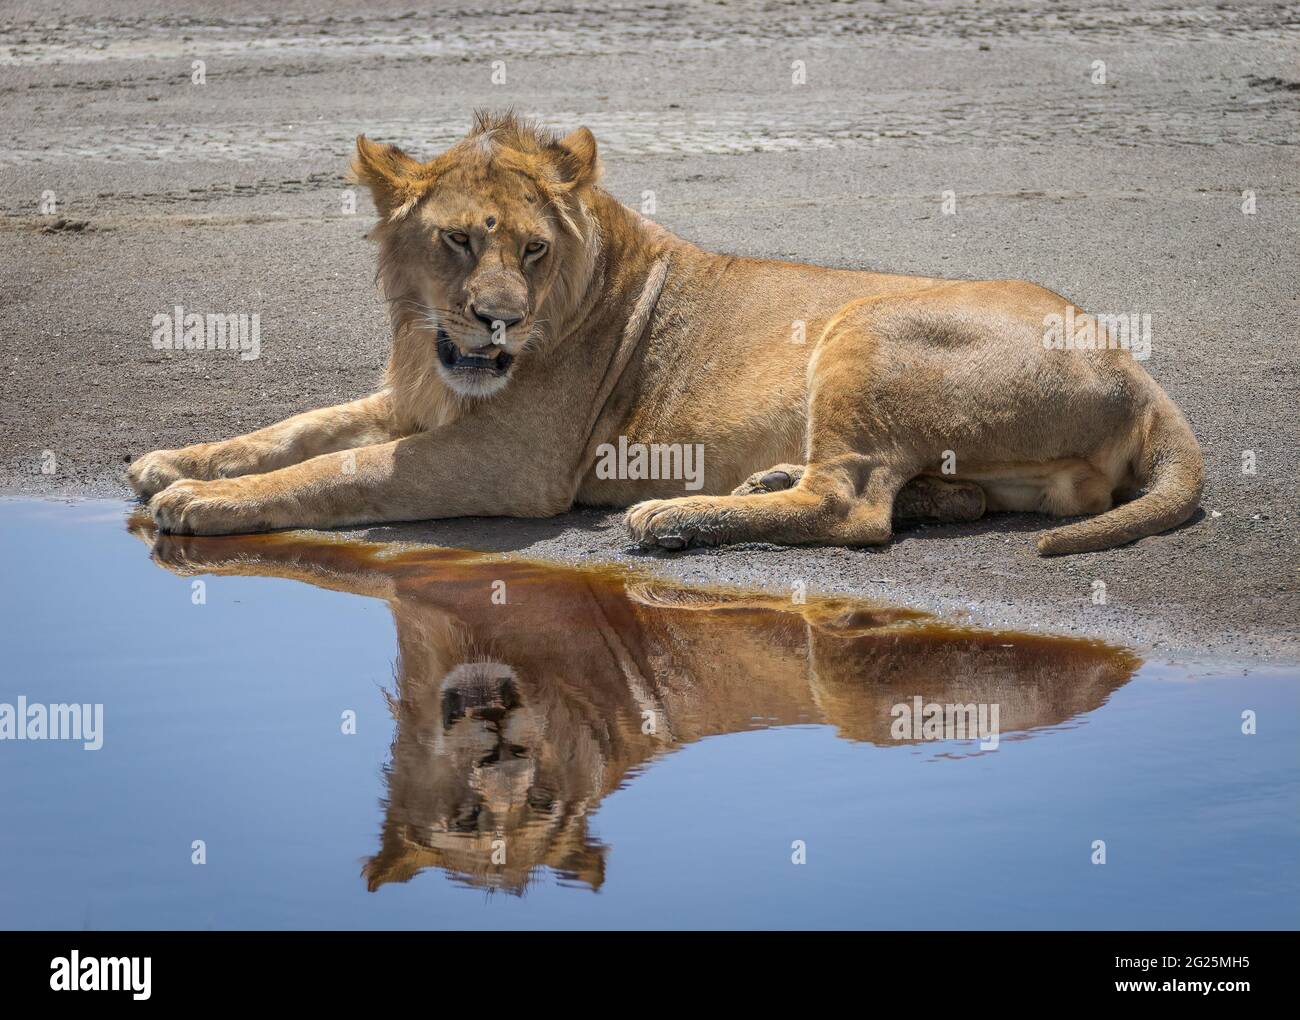 A young male lion resting at a water hole with a reflection. Stock Photo